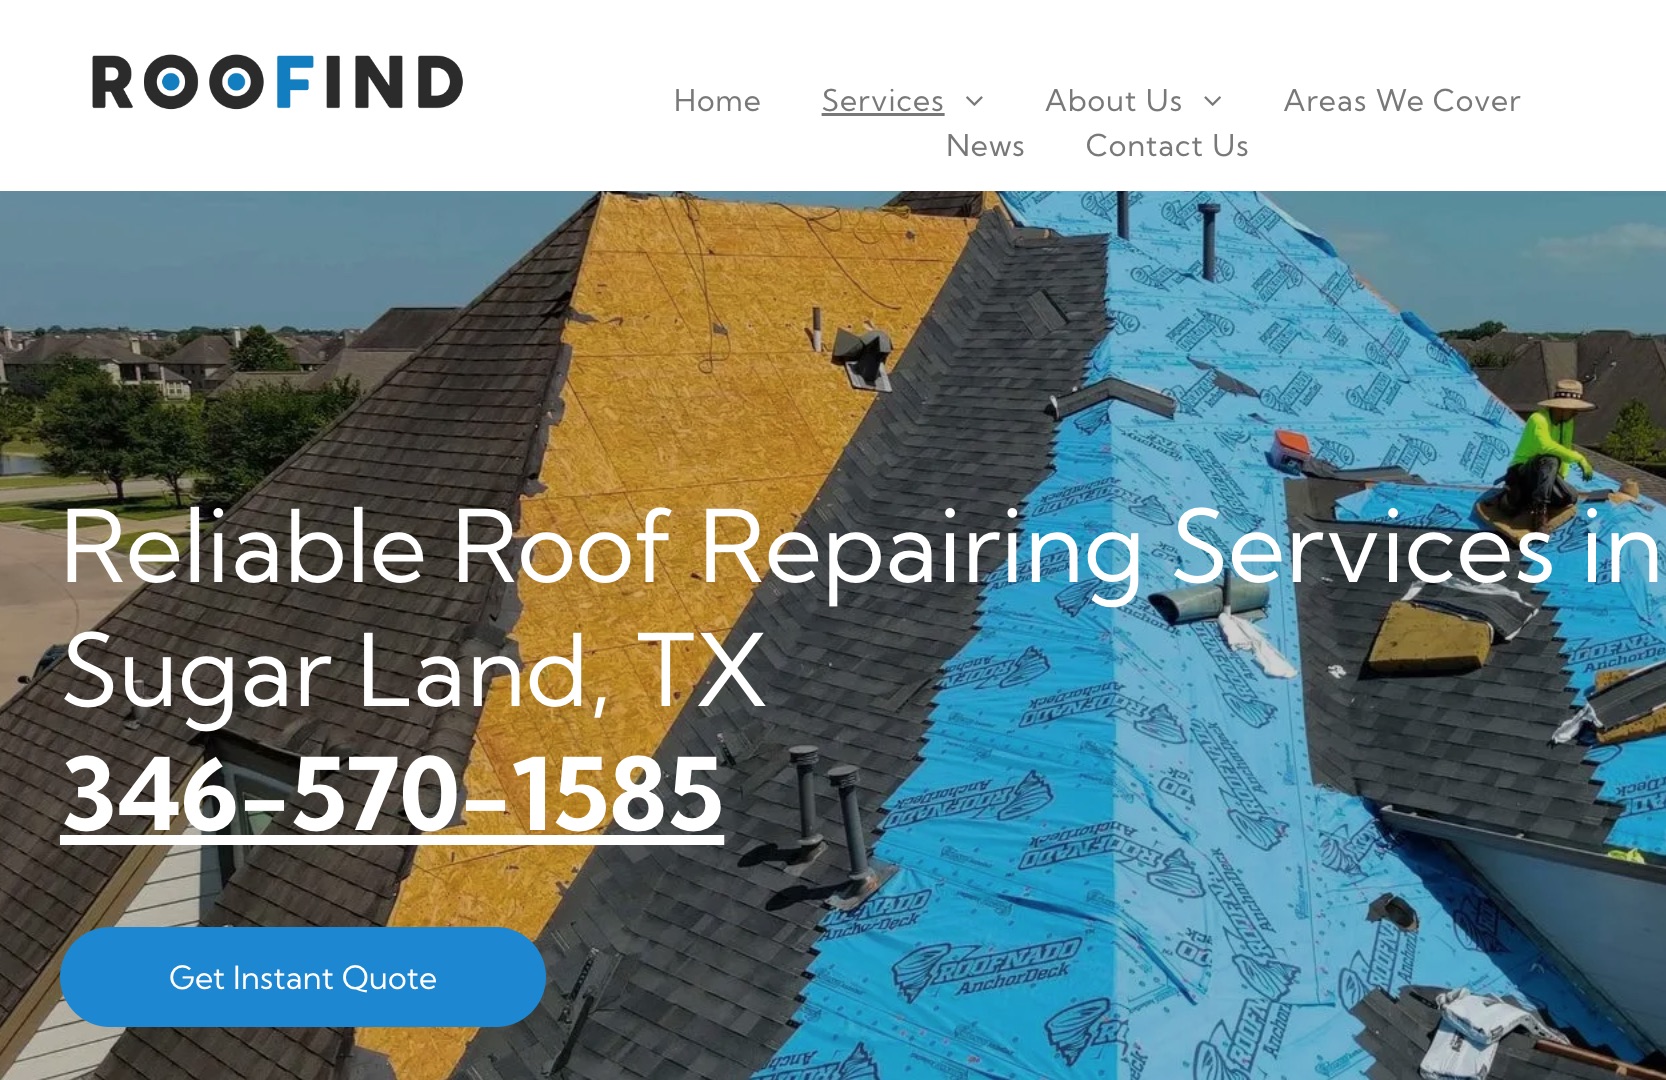 Guardians of Your Shelter: Roofind’s Superior Roofing in Houston, TX